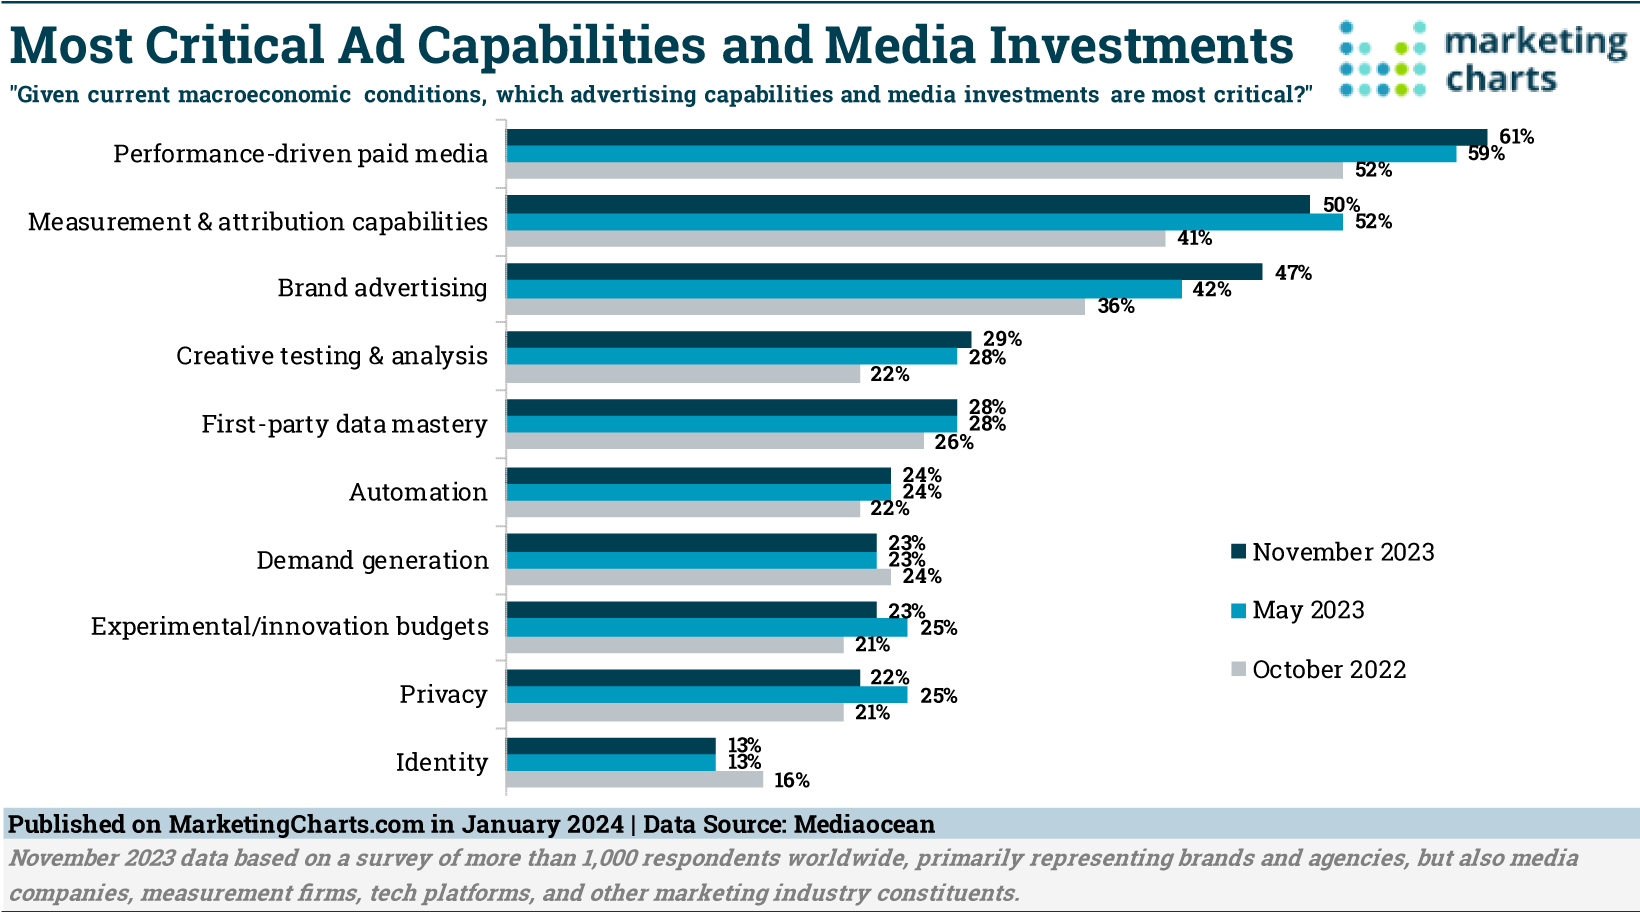 Performance Media Most Critical in Today’s Economic Climate, Marketers Say